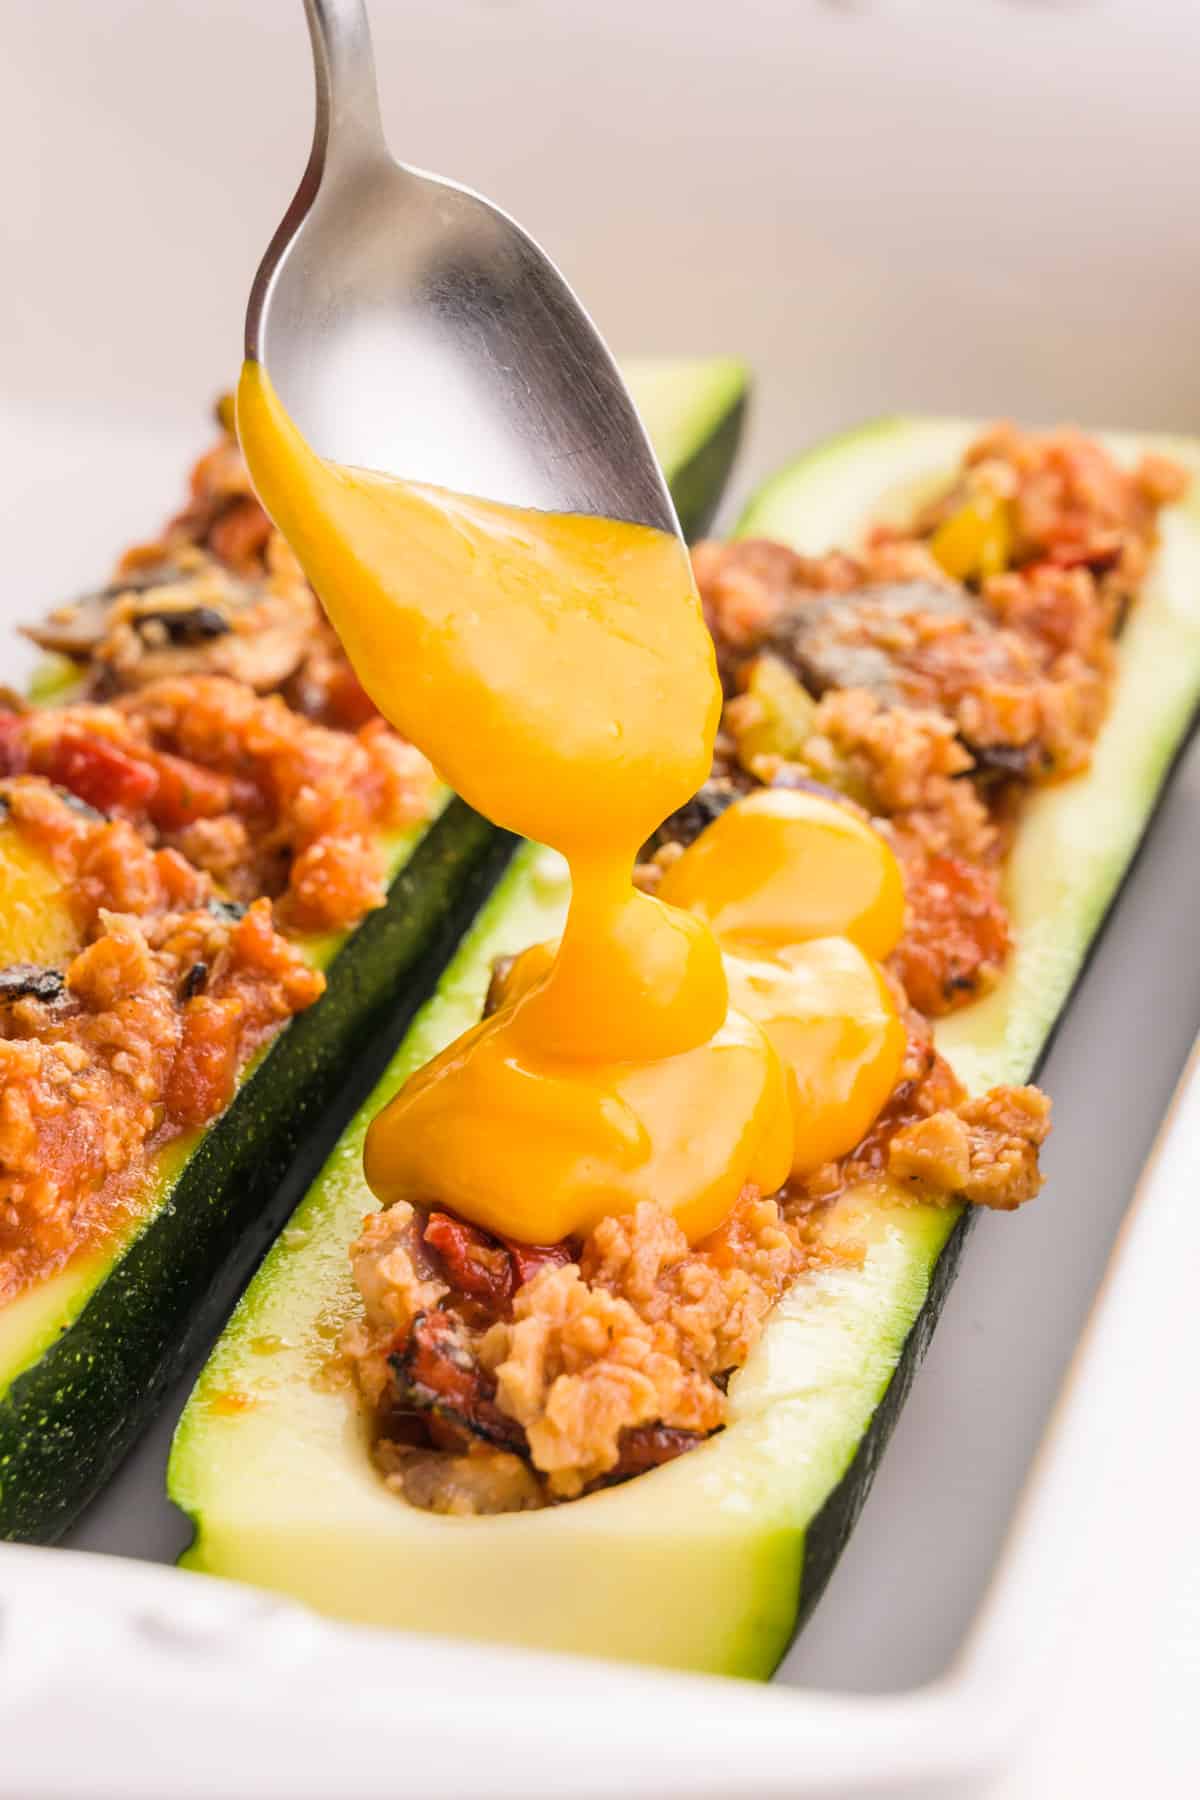 A spoonful of melted vegan cheese is drizzled over the zucchini boat.